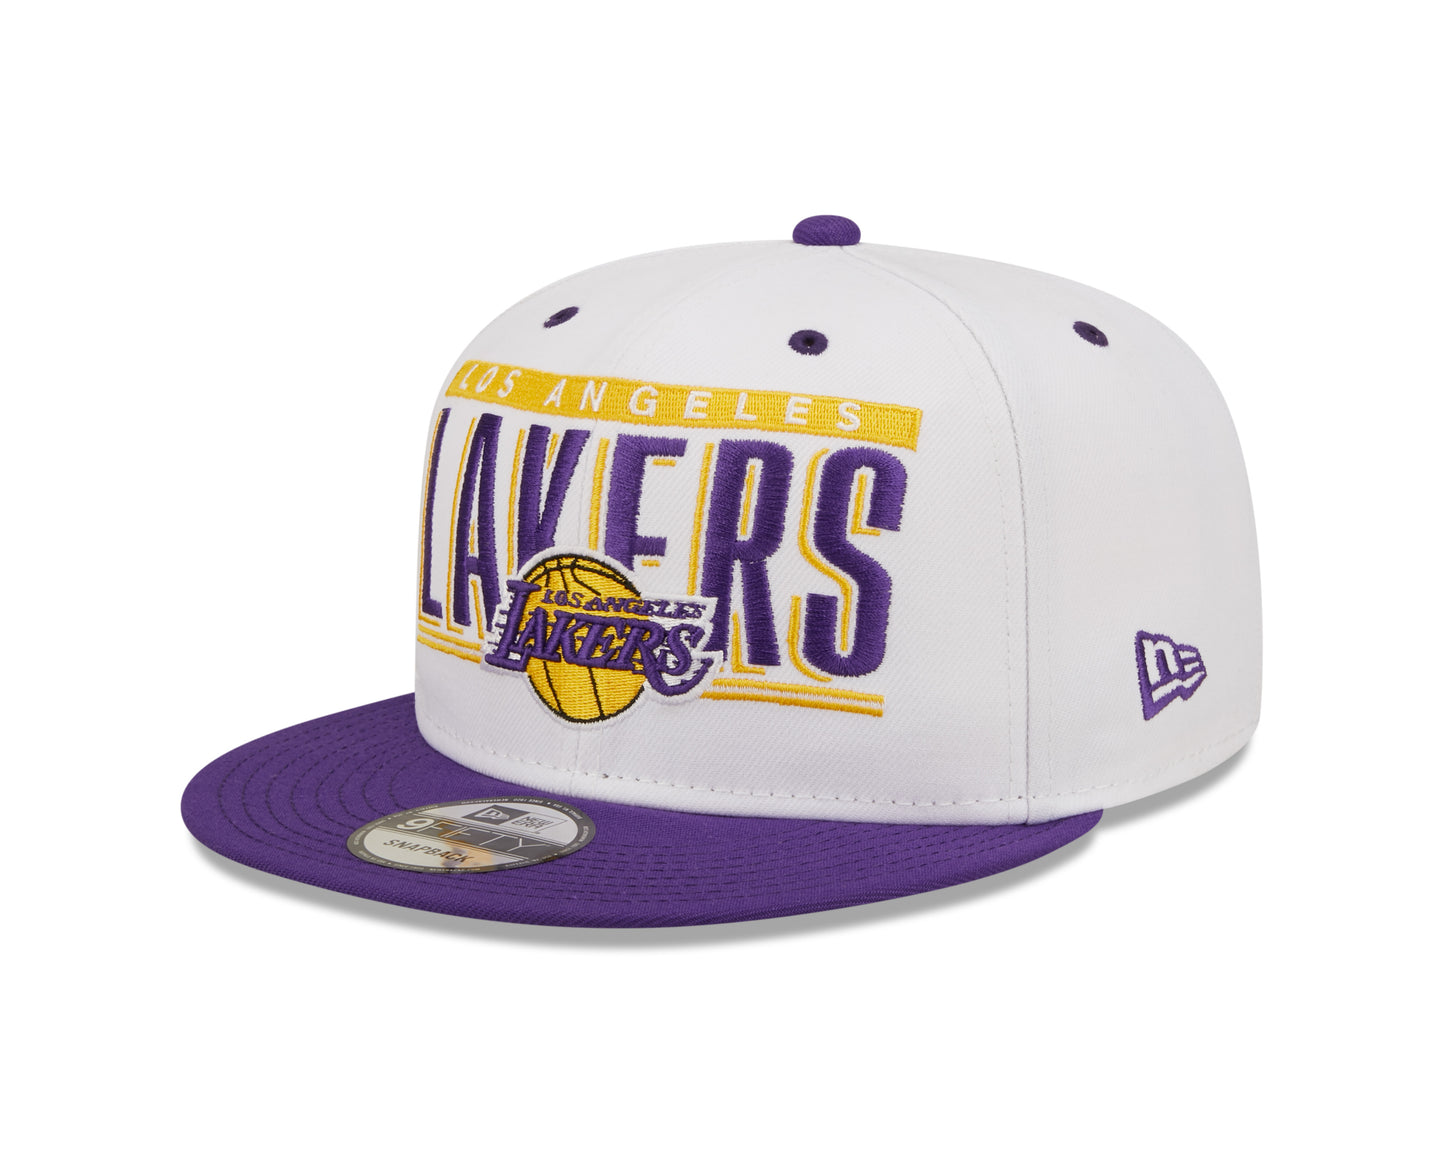 Los Angeles Lakers New Era Retro Title White / Purple 9FIFTY Snap Back Hat